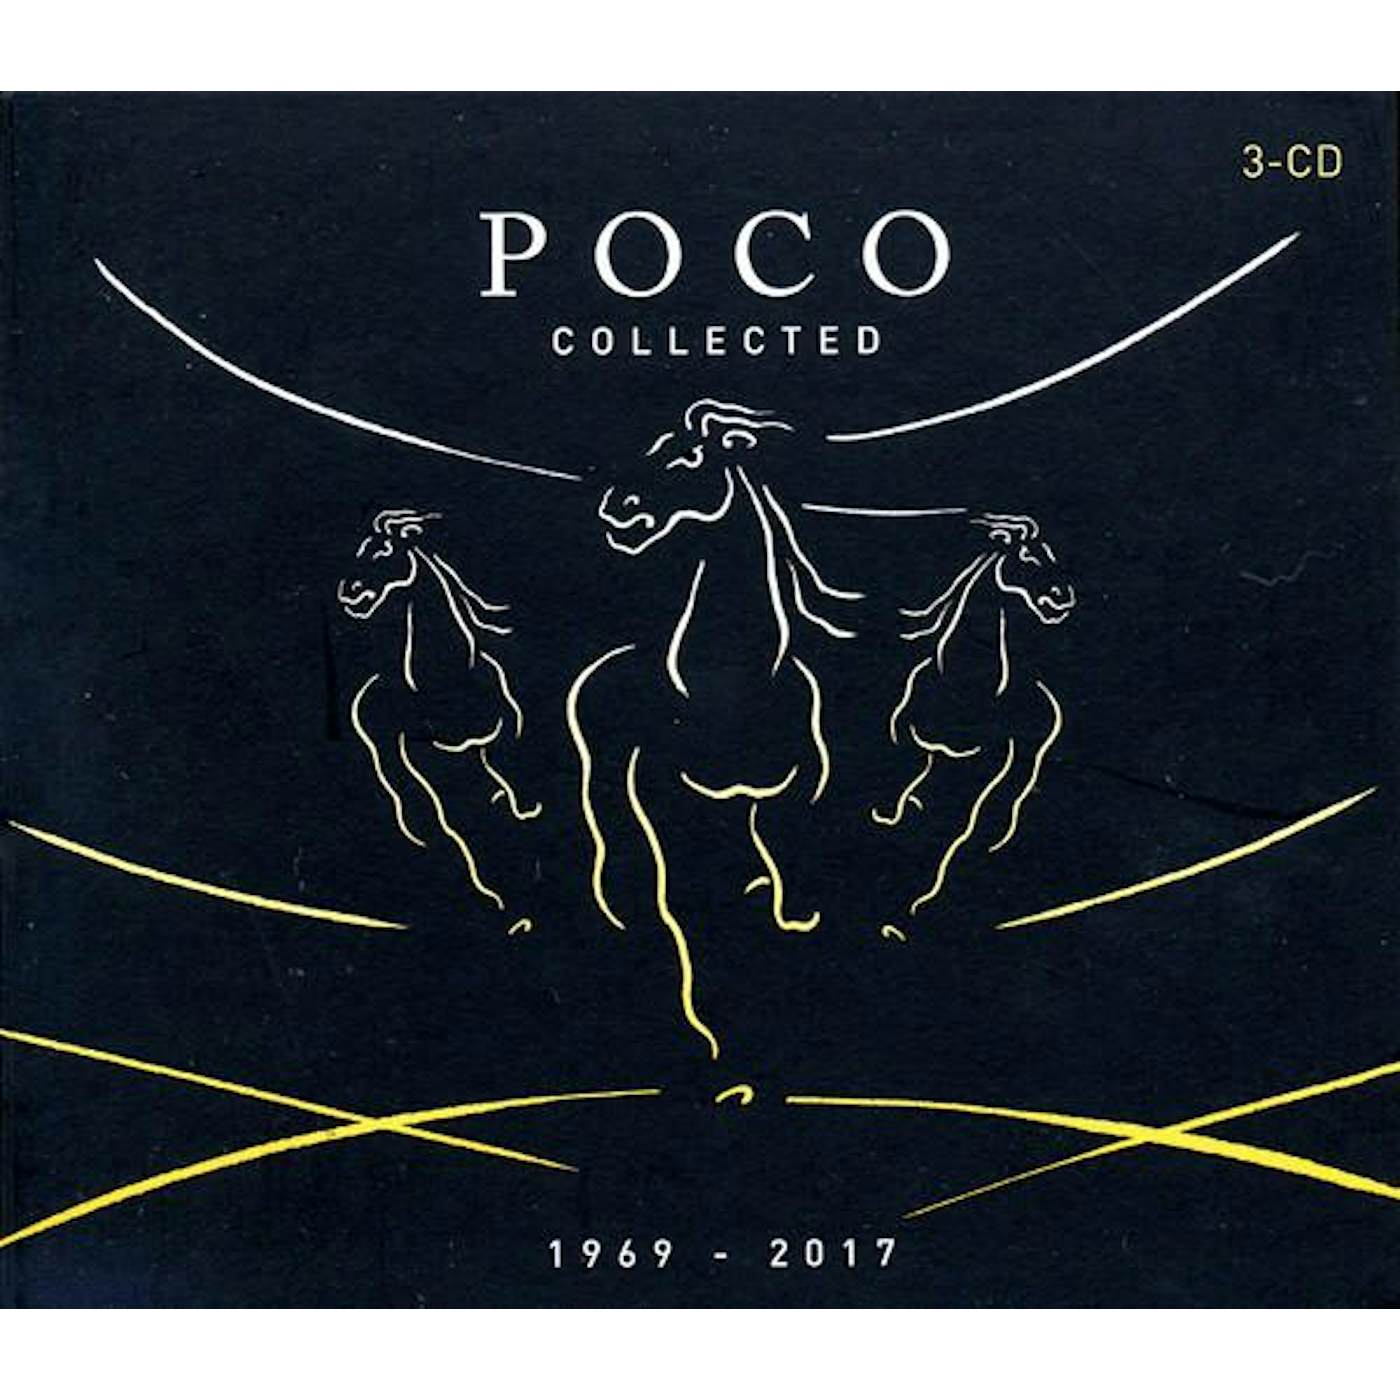 Poco COLLECTED (3CD/IMPORT) CD